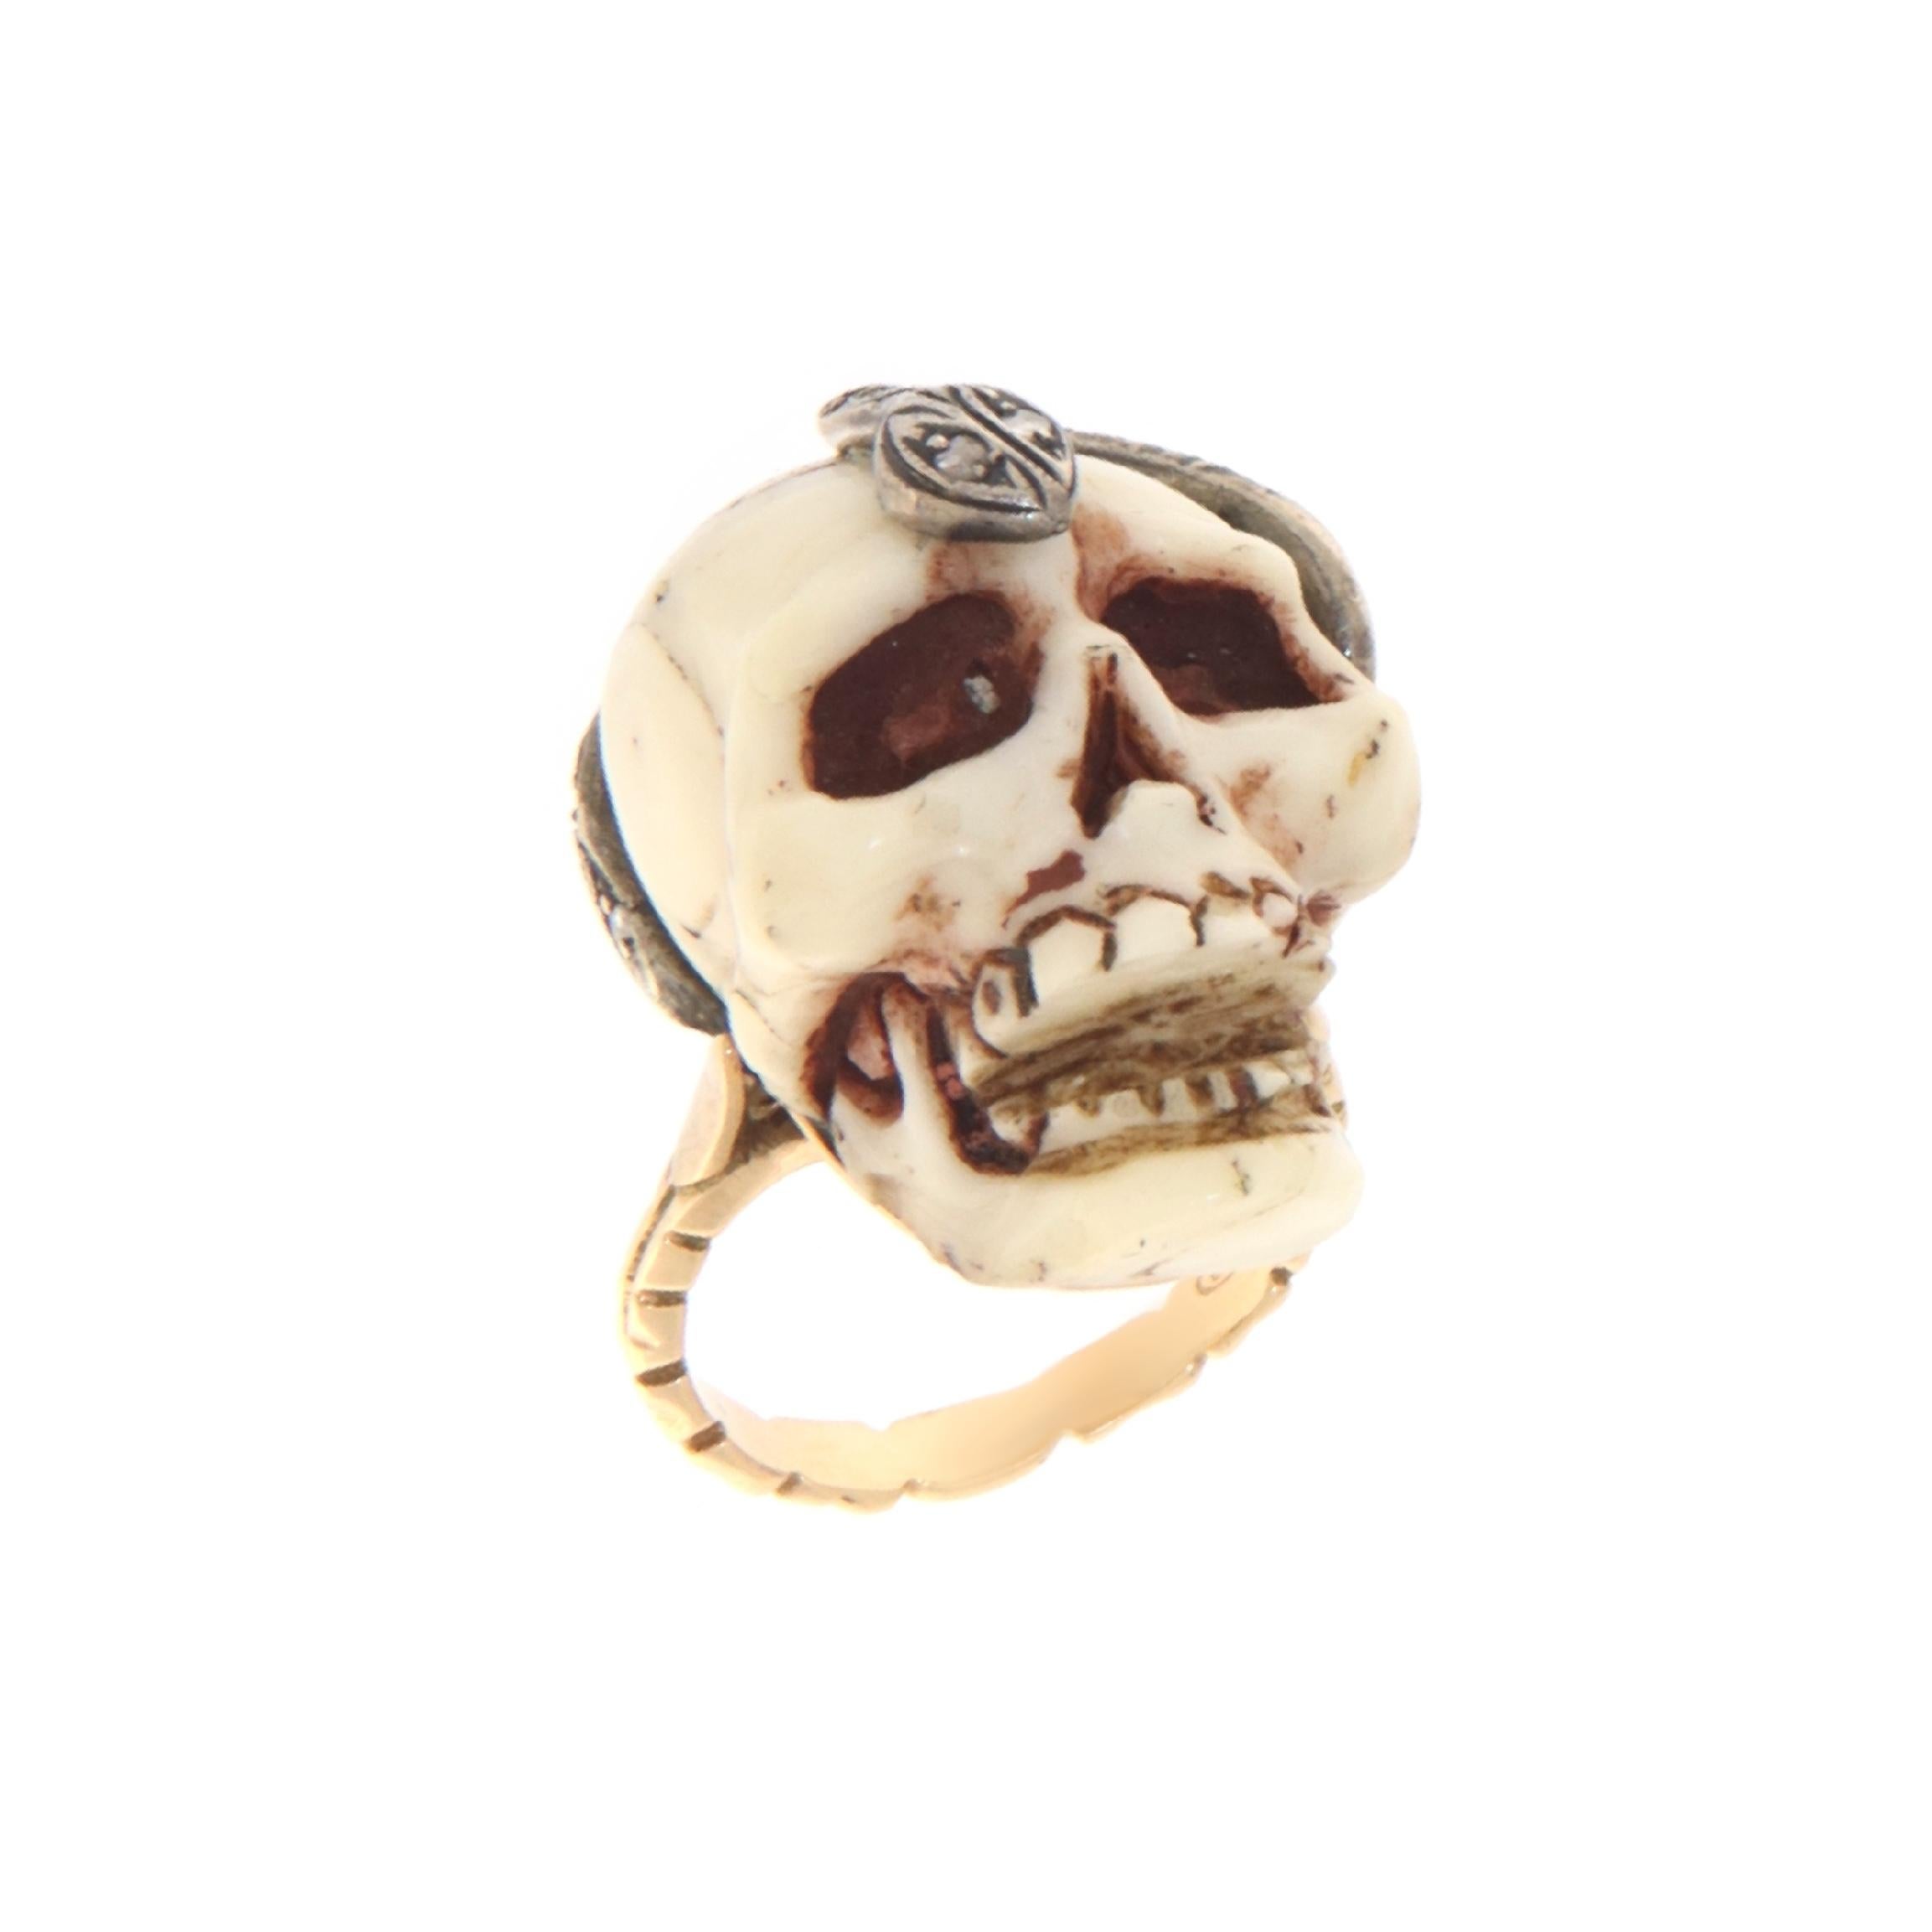 This bold ring merges artisanal craftsmanship with symbols rich in history, crafted in 14-karat yellow gold and 800 silver. The focal point is an intriguing coral skull, carved with impressive detail to capture the visceral essence and evocative